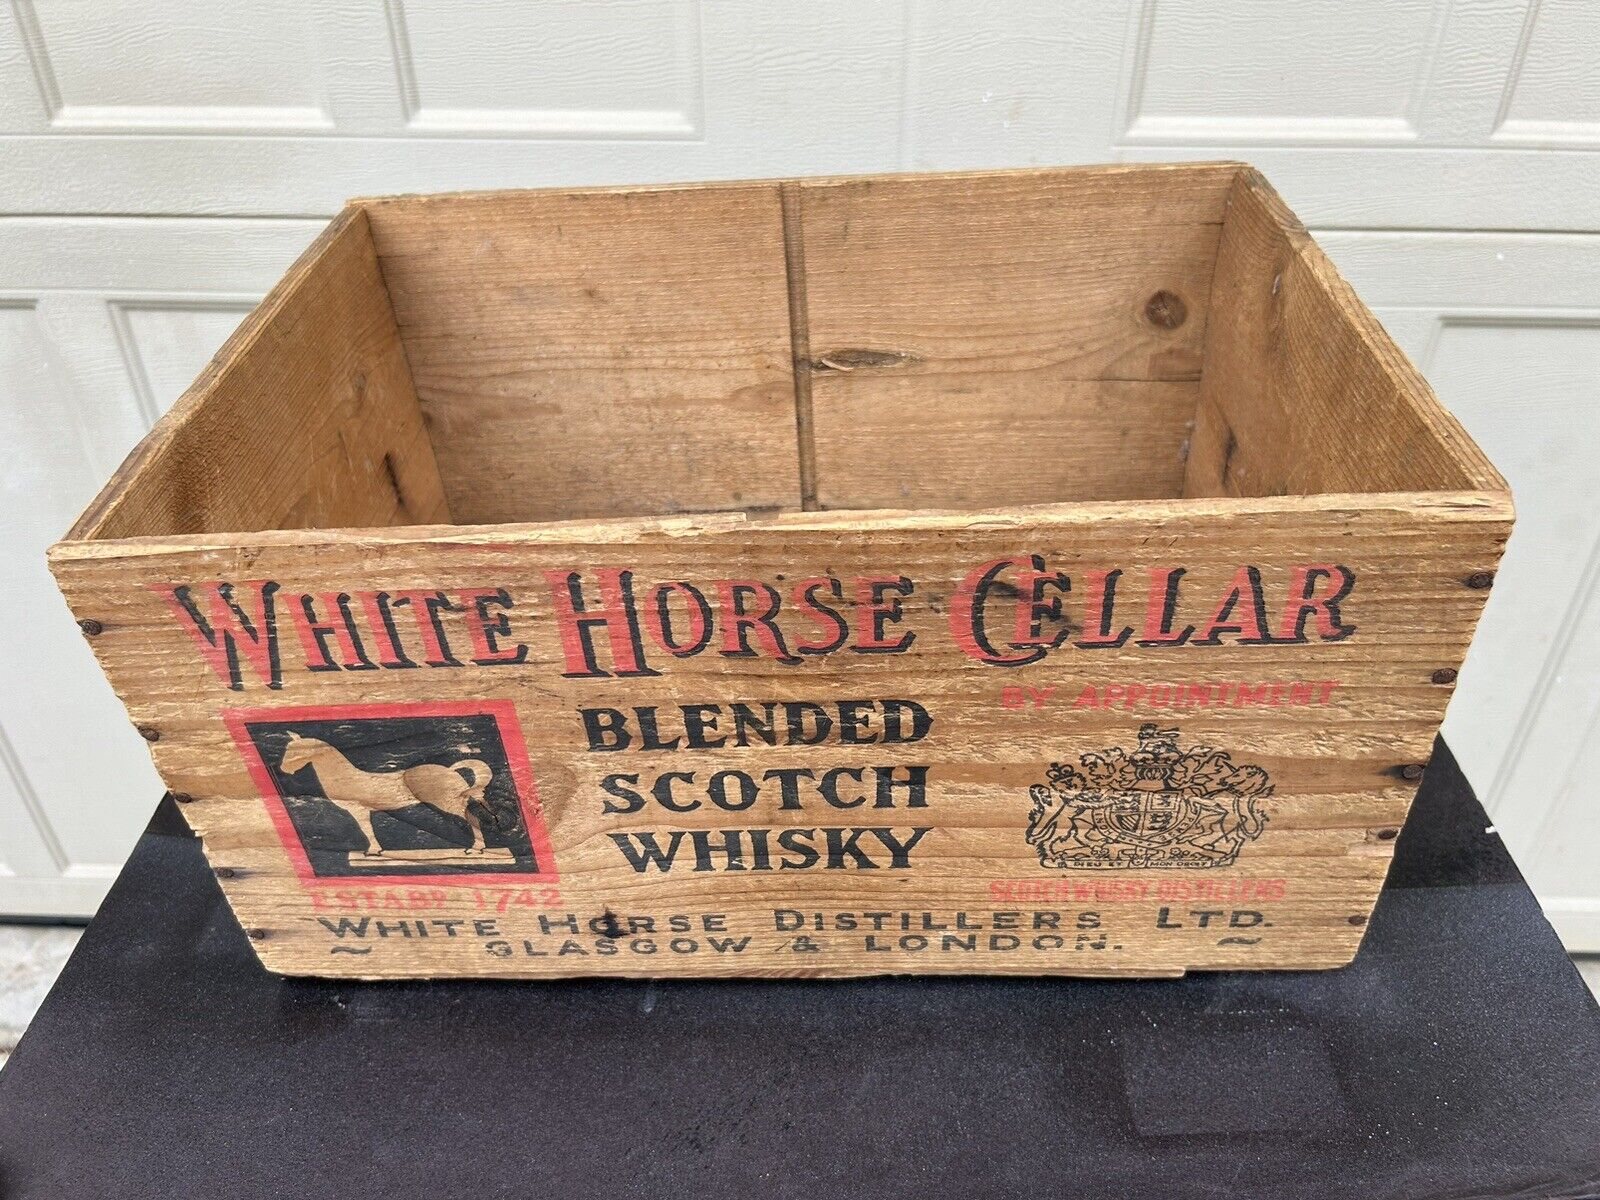 Vintage White Horse Cellar Scotch Whisky Wood Crate Box